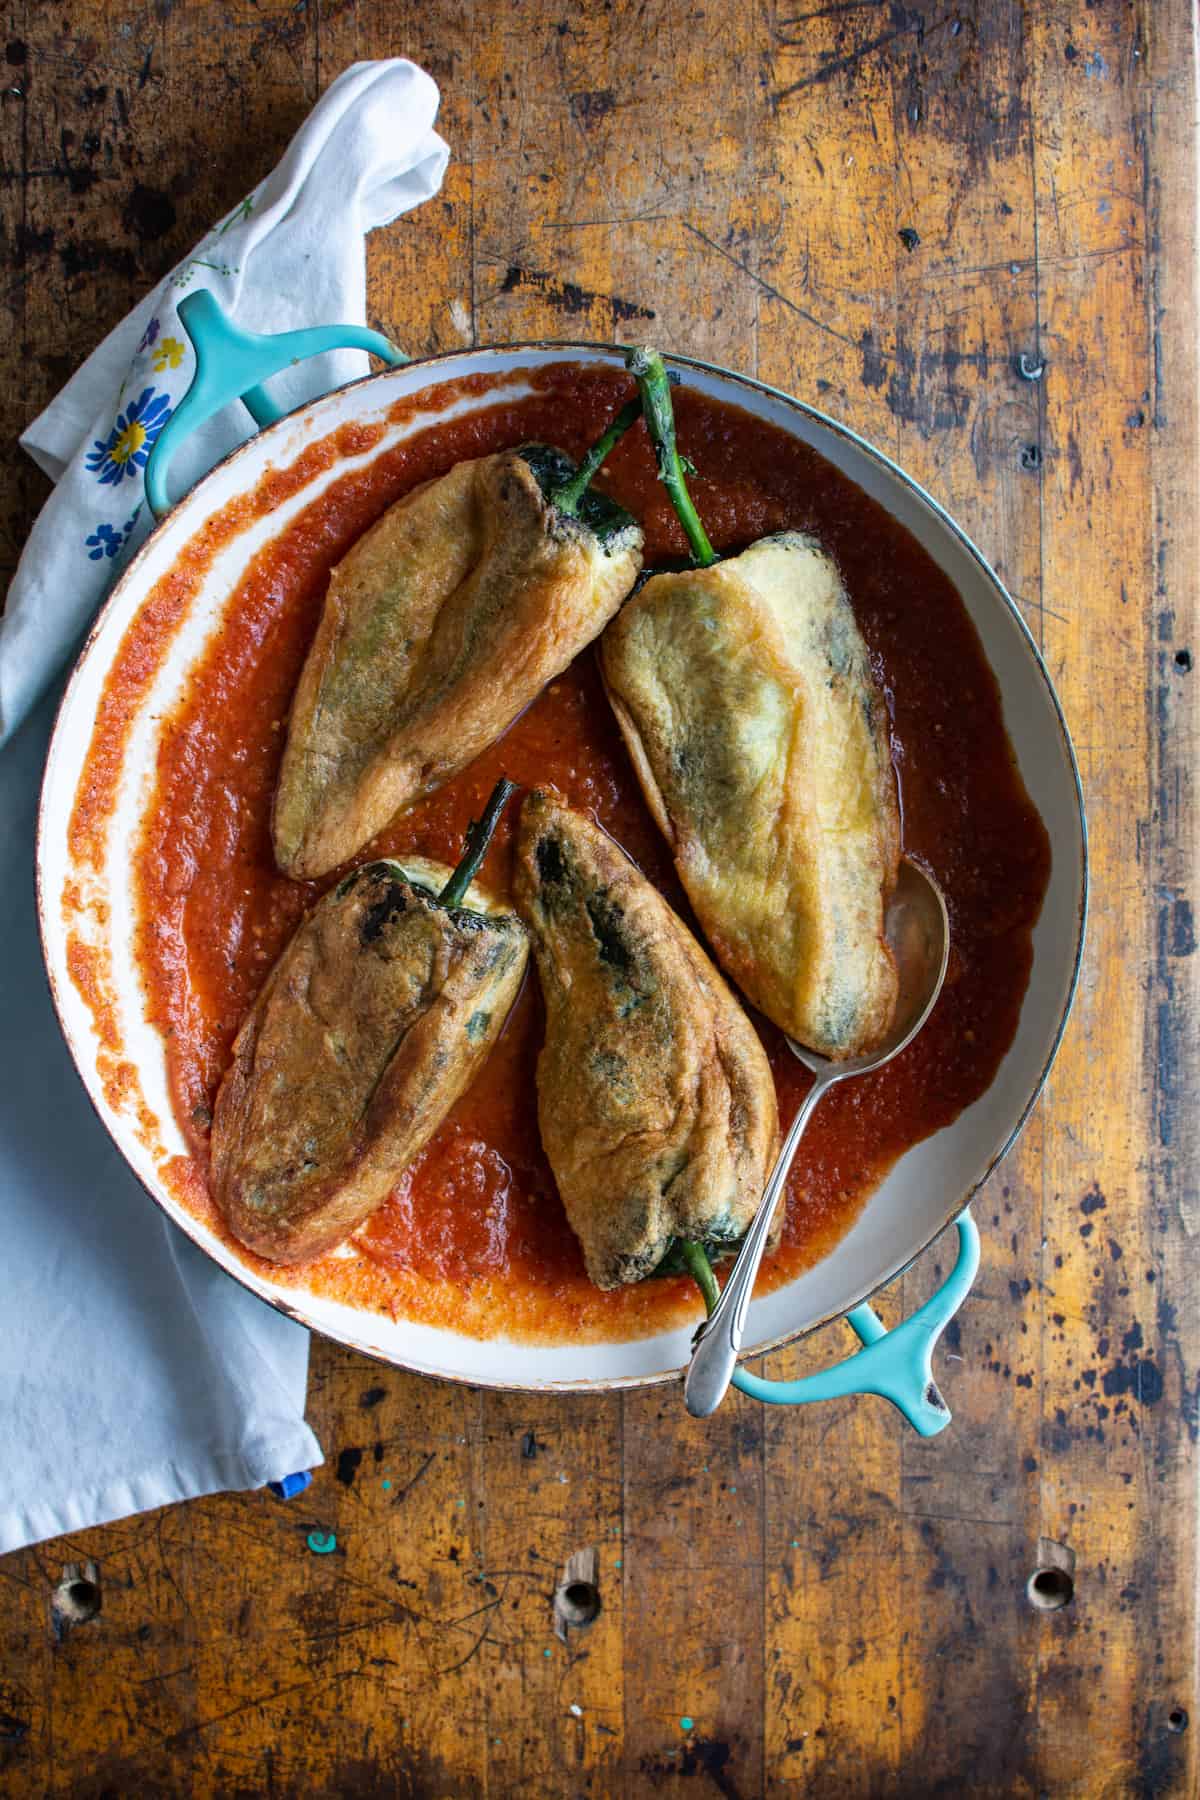 This Authentic Chile Relleno Recipe takes you step-by-step on how to make this traditional Mexican dish of poblano peppers stuffed with cheese, dipped in egg batter and lightly fried. Serve with frijoles de olla, a crisp salad, and salsa ranchera—Ugh, so good! #chilerelleno #mexicanfood #vegetarian #holajalapeno